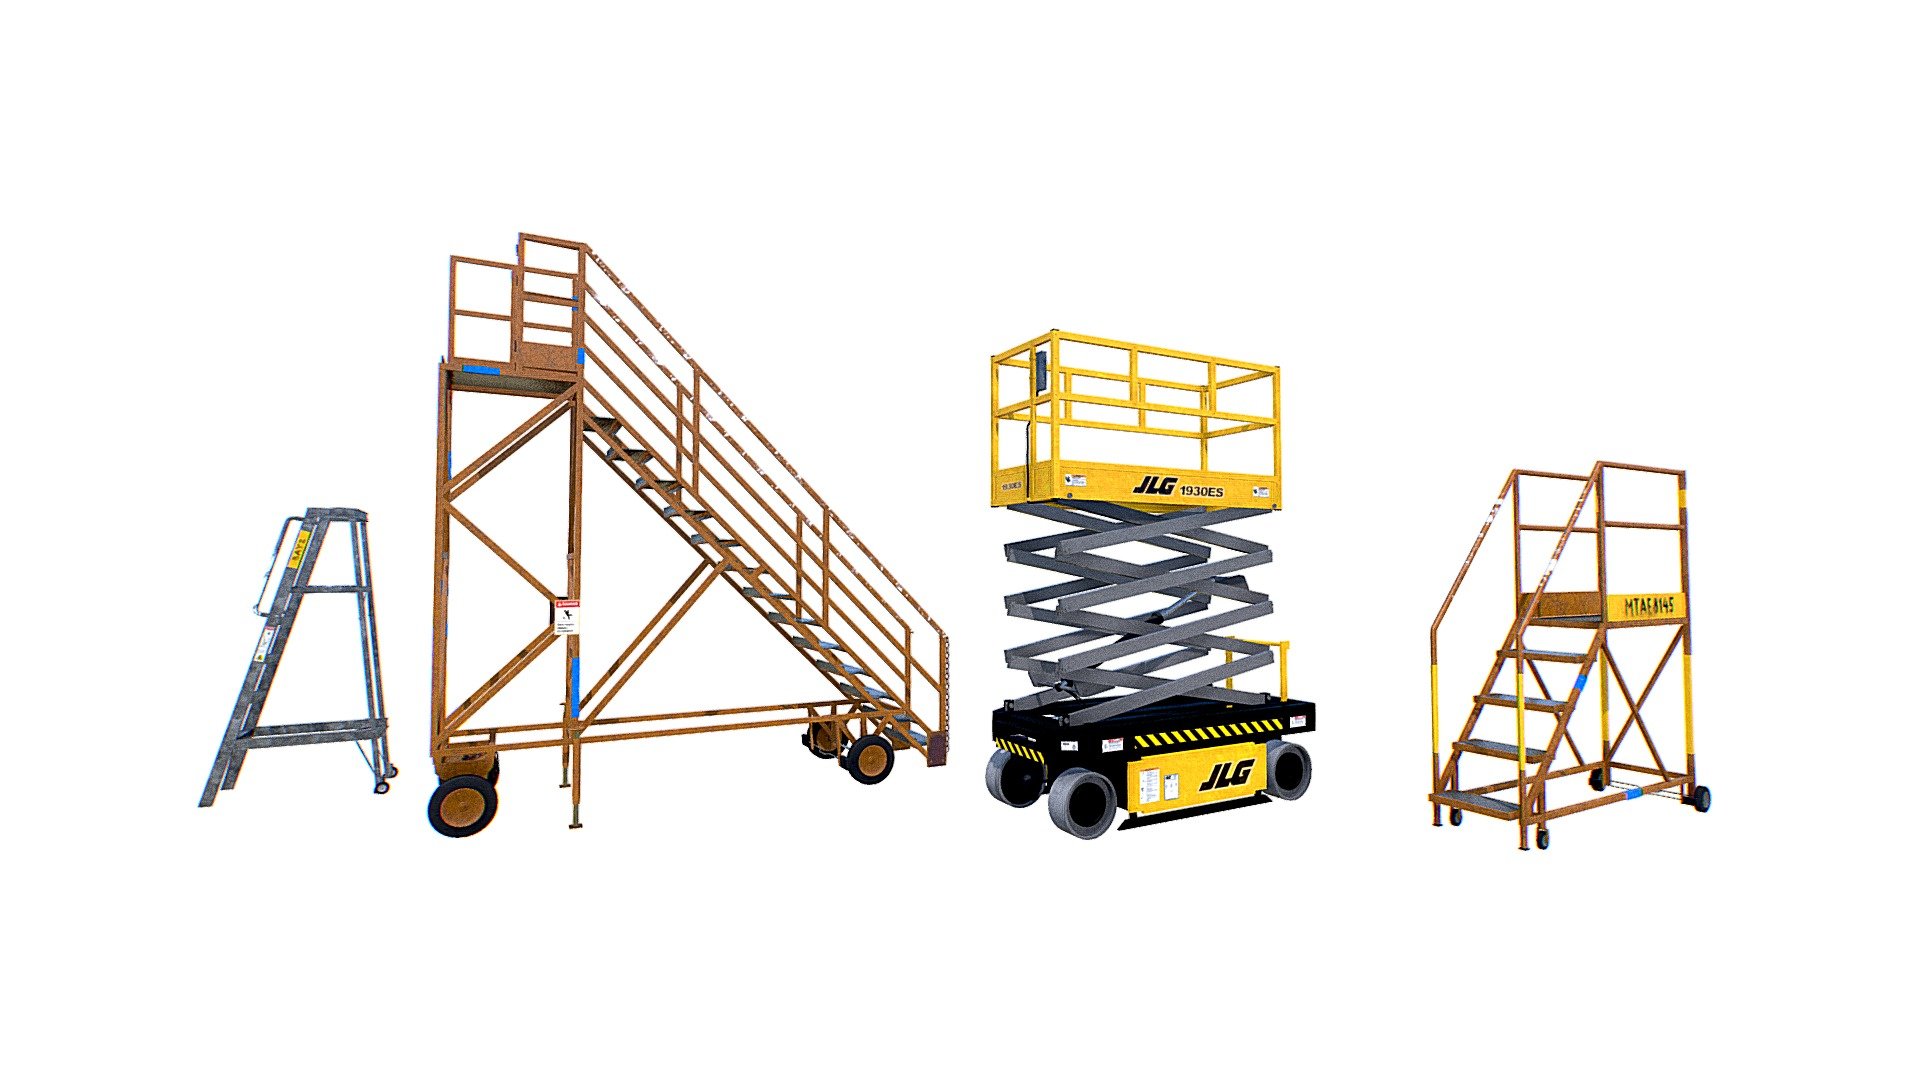 Airport Ladders Photorealistic 3D Collection

High Airplane Ladder
Low Airplane Ladder
Aluminium Ladder
Scissor Ladder Lift - Aircraft Maintenance Ladders Collection - Buy Royalty Free 3D model by Omni Studio 3D (@omny3d) 3d model